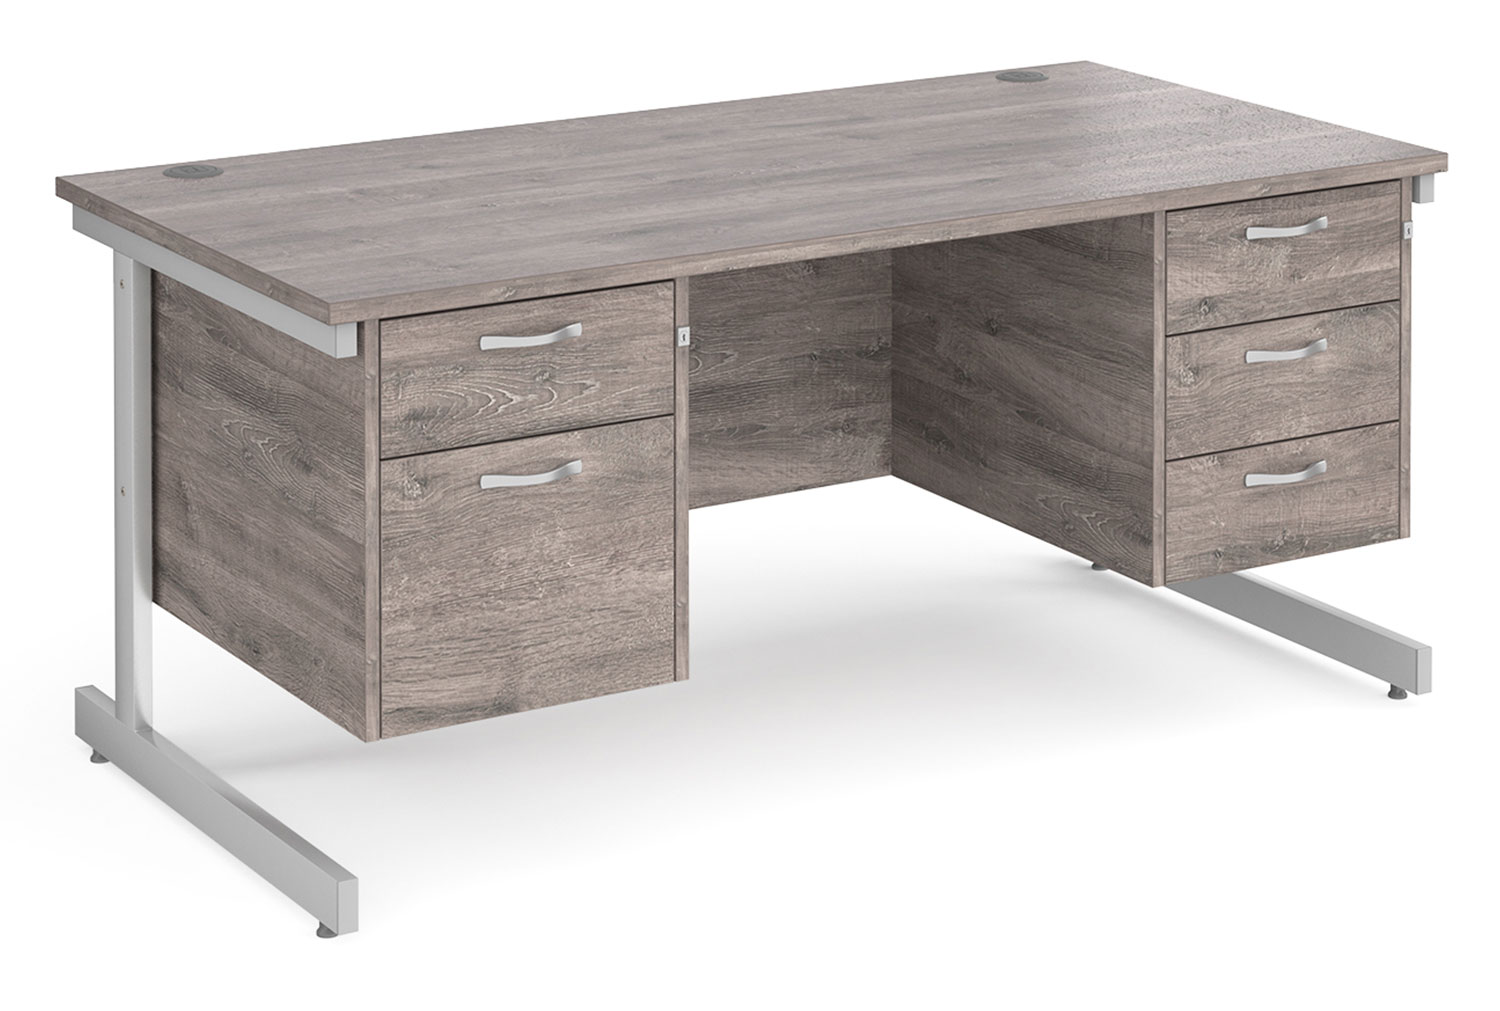 All Grey Oak C-Leg Executive Office Desk 2+3 Drawers, 160wx80dx73h (cm), Express Delivery